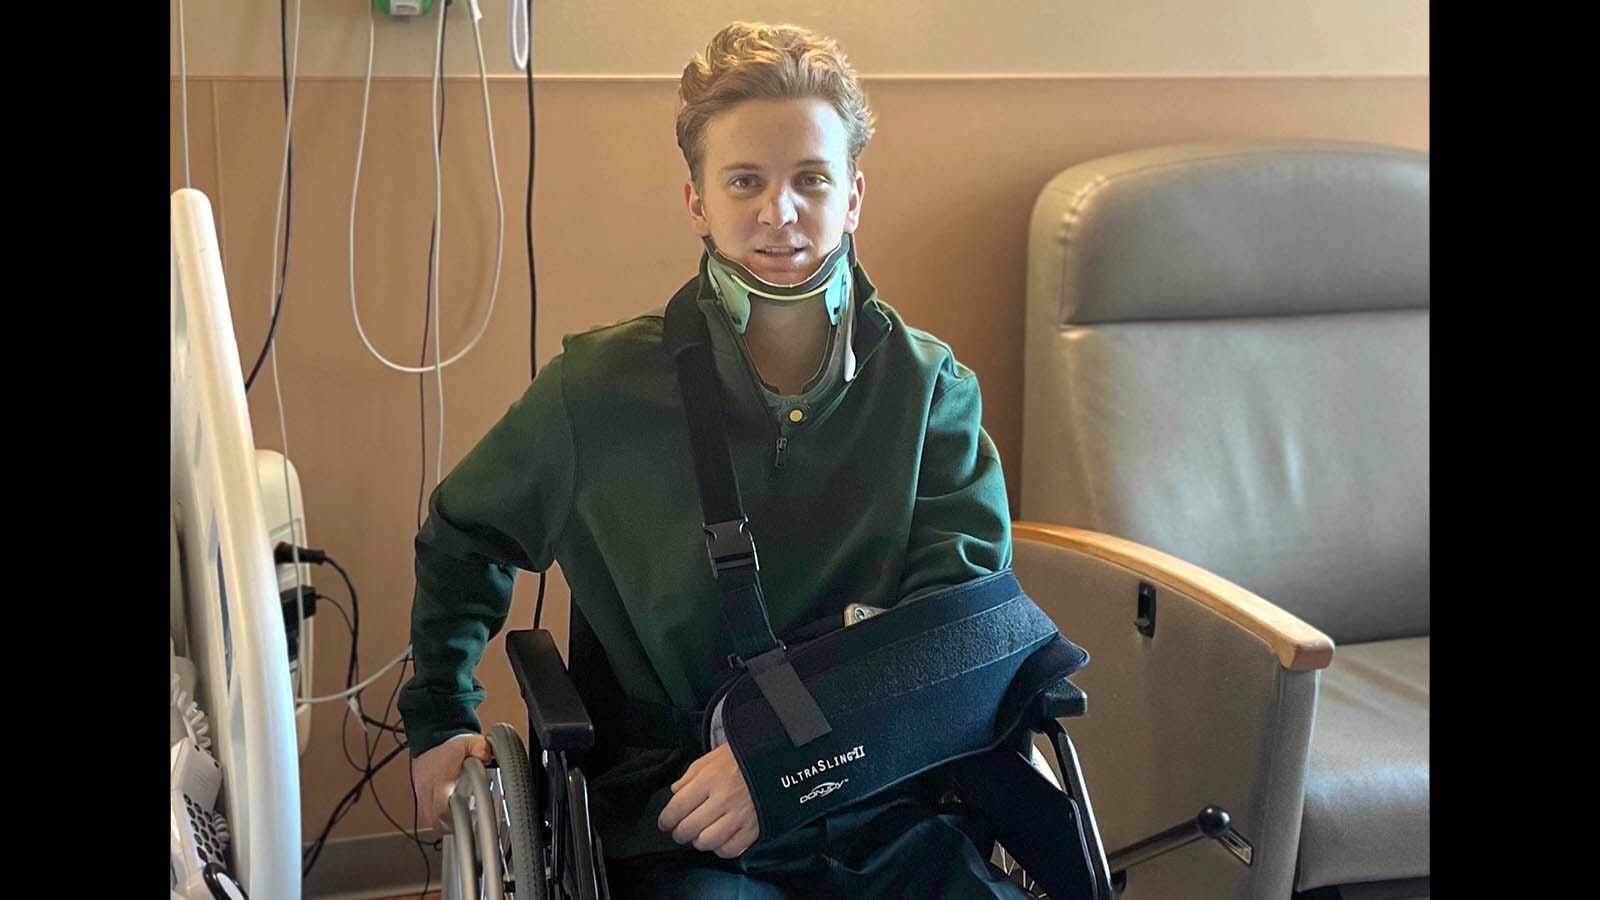 Austin Broderson, a Casper College rodeo rider and native of Canada, was released from a Denver hospital Thursday less than two weeks after being involved in a horrific wreck on a bareback ride at the National Western Stock Show.